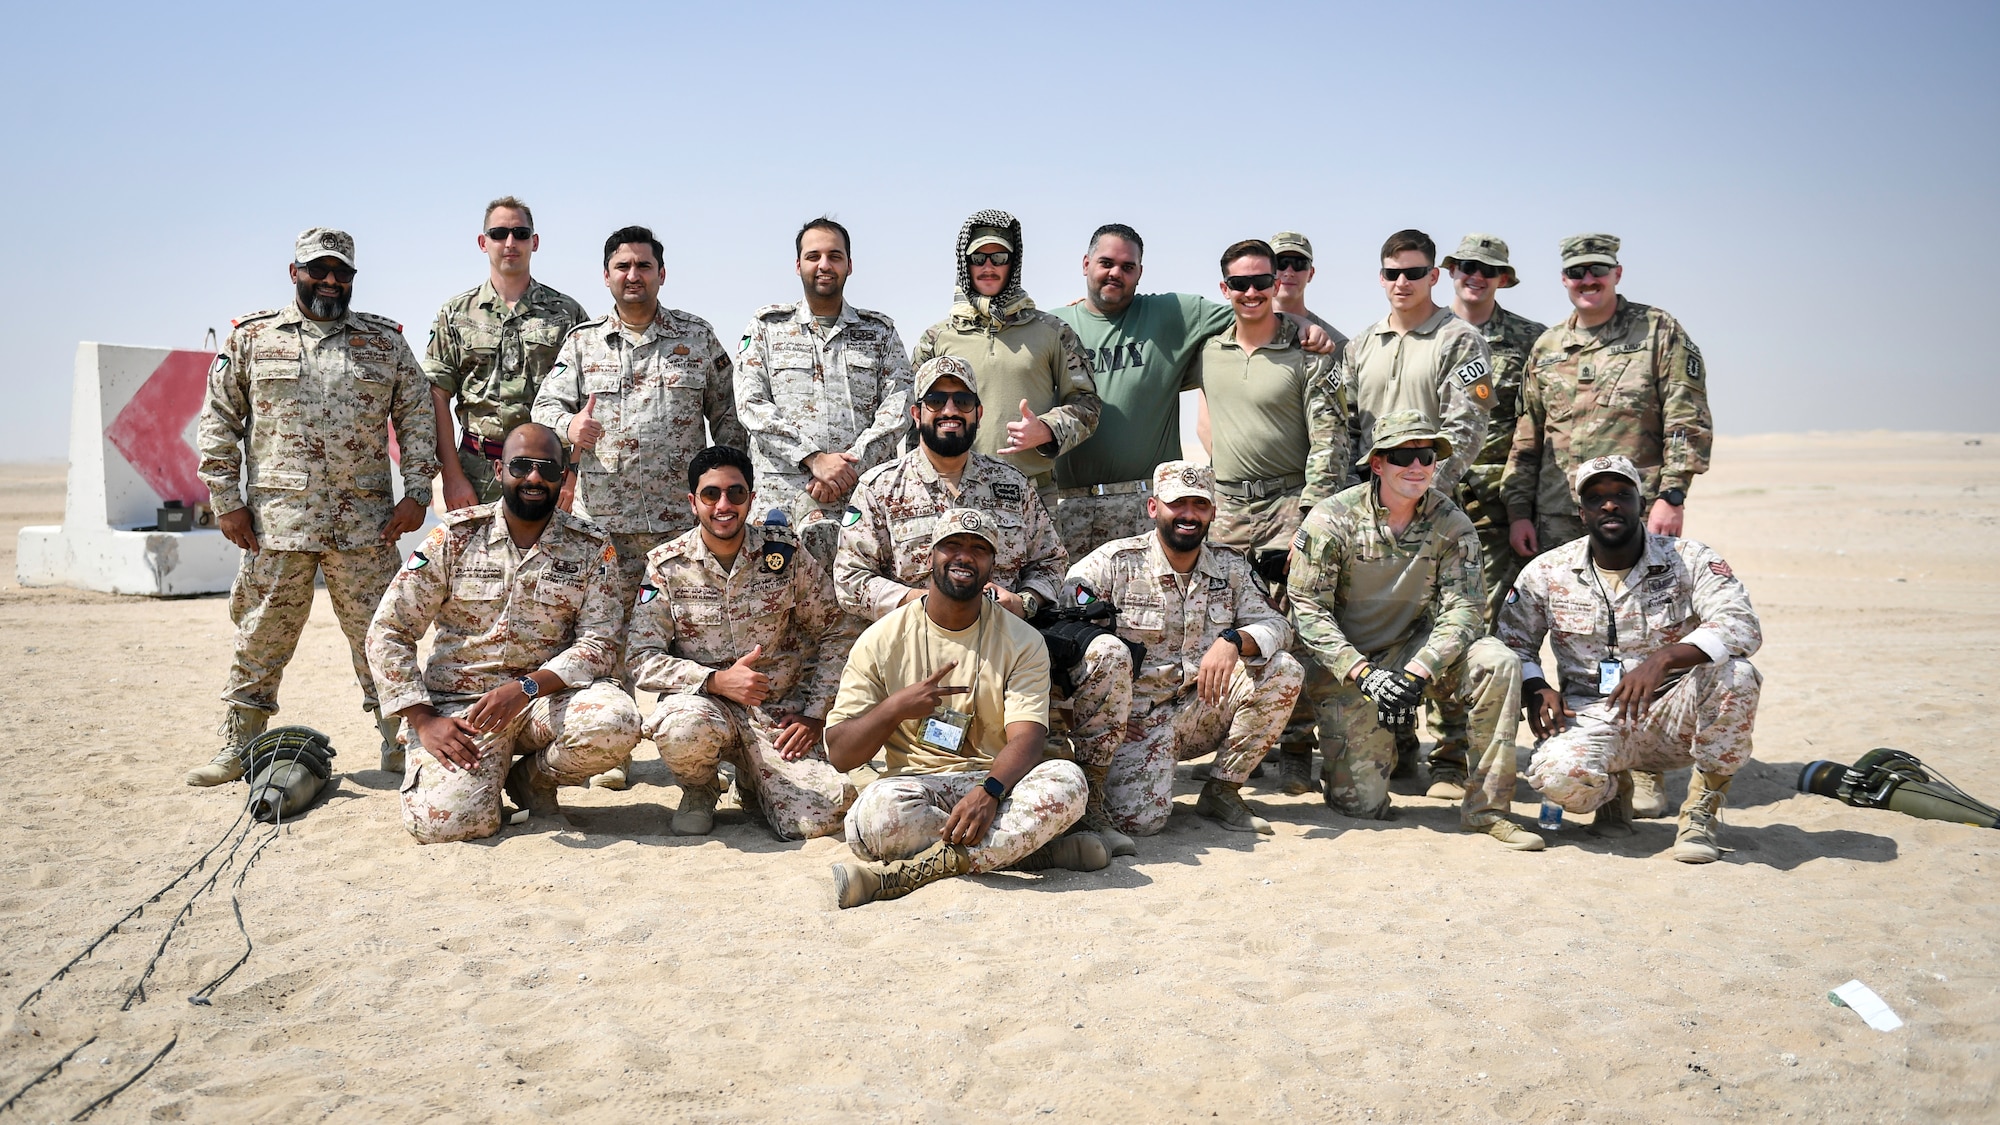 U.S., Kuwaiti and British EOD technicians pose for a group photo at the conclusion of munitions disposal training at the Udari Range, Kuwait, Sept. 30, 2019. The training was designed for U.S. and Kuwaiti forces to share techniques, synchronize capabilities and build partnerships by sharing knowledge and experience.